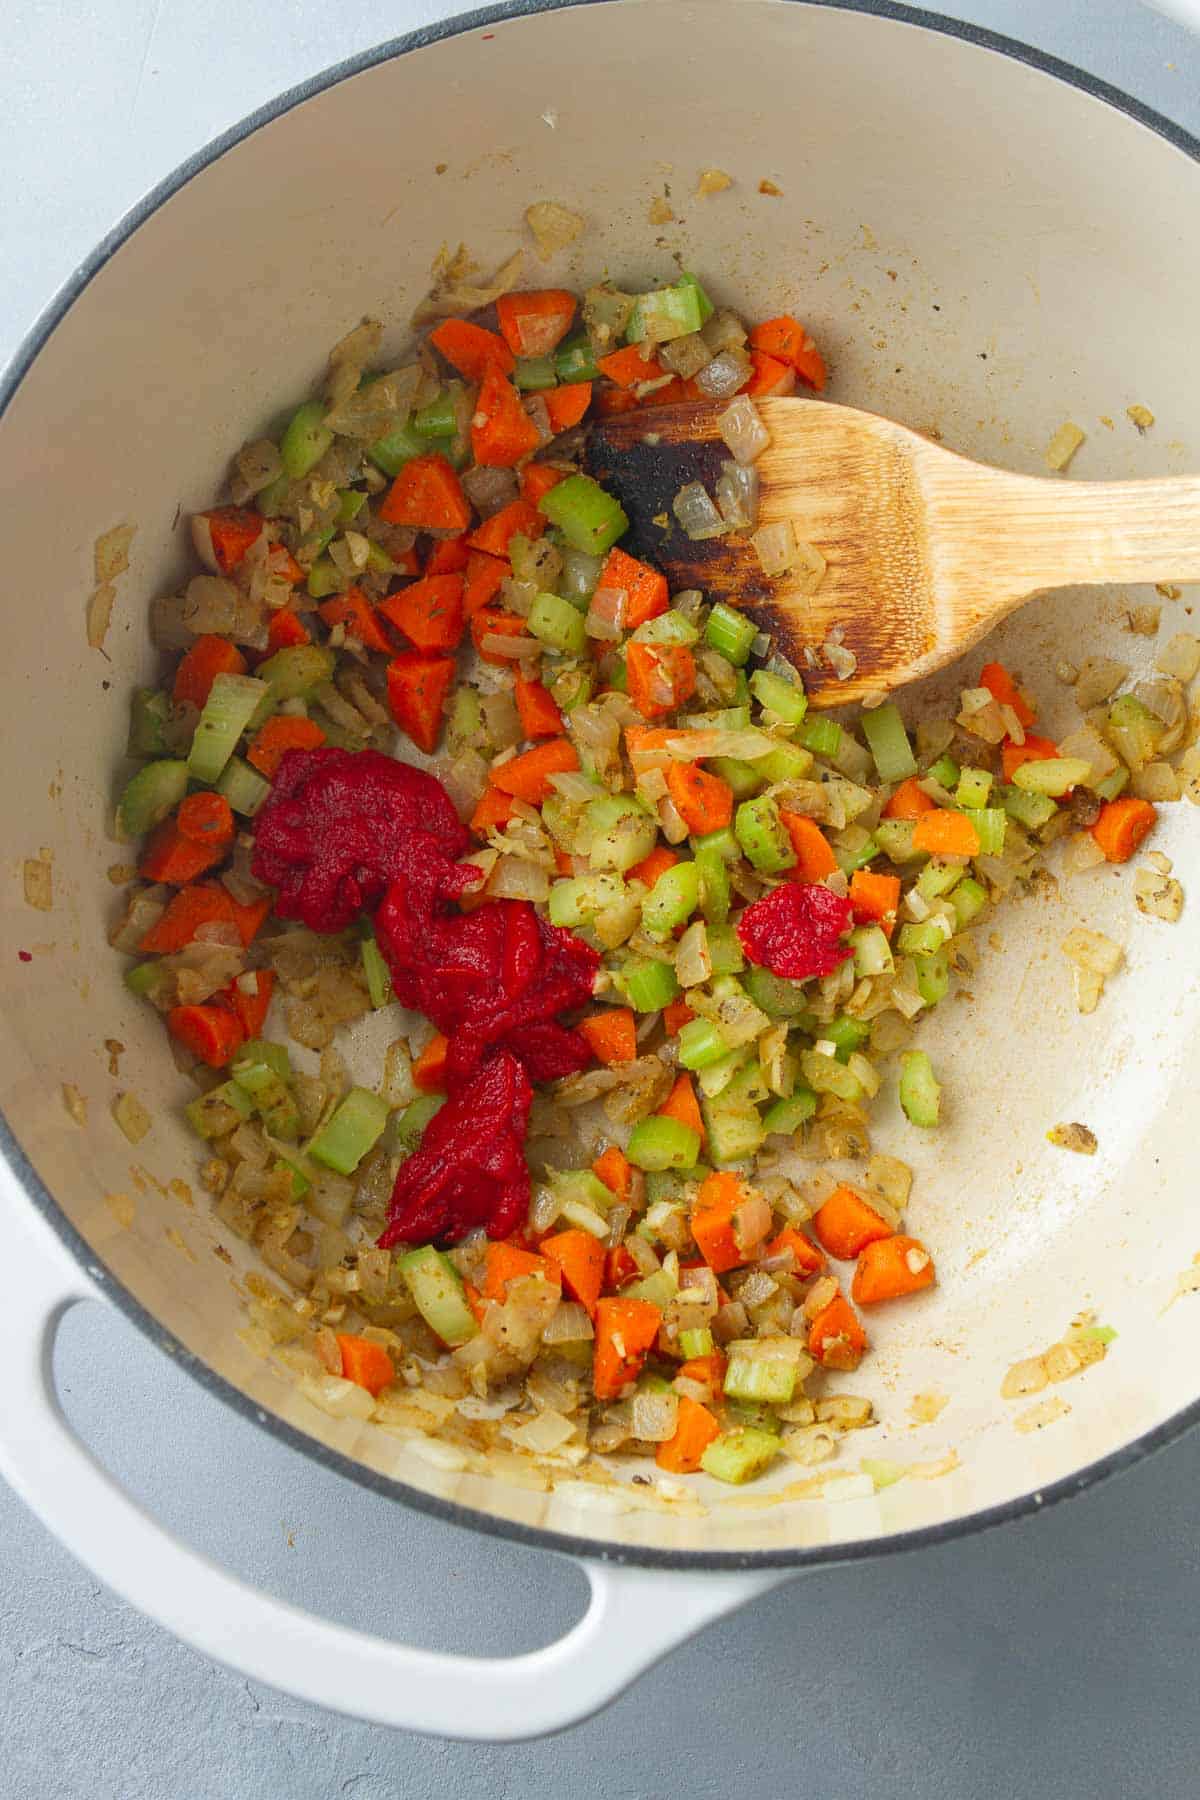 Tomato paste, carrots, onions and celery in a saucepan with a wooden spatula.